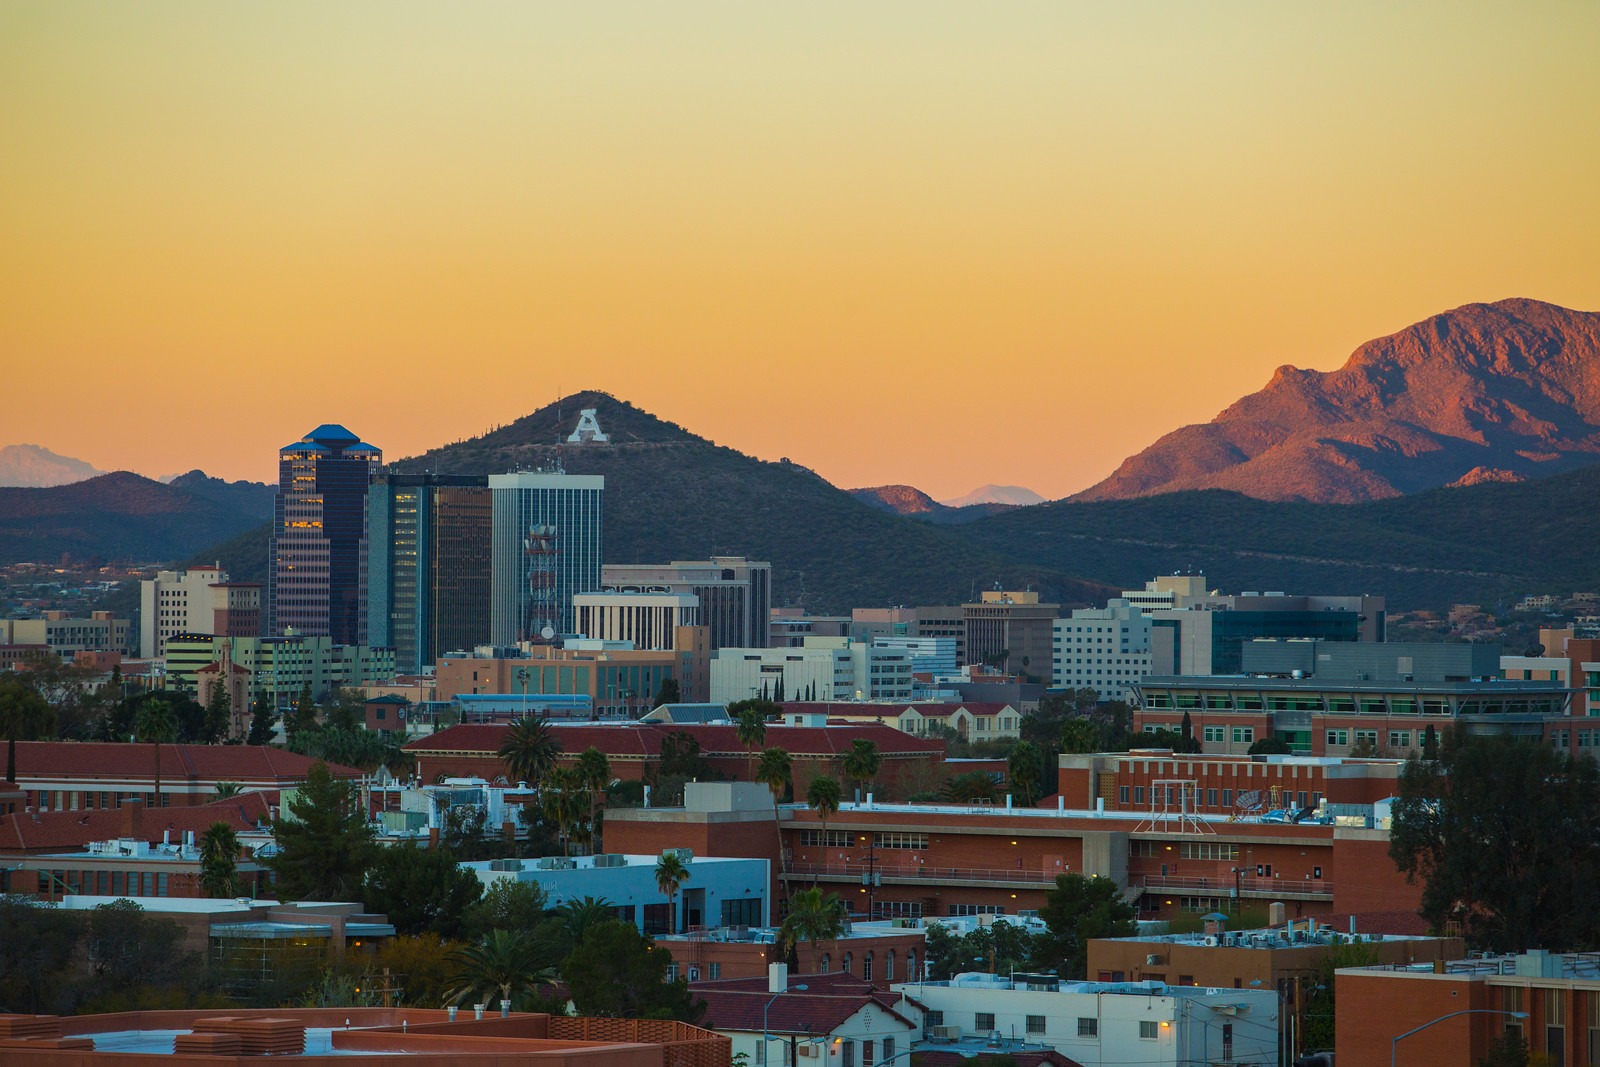 Tucson skyline with 'A' Mountain in distance